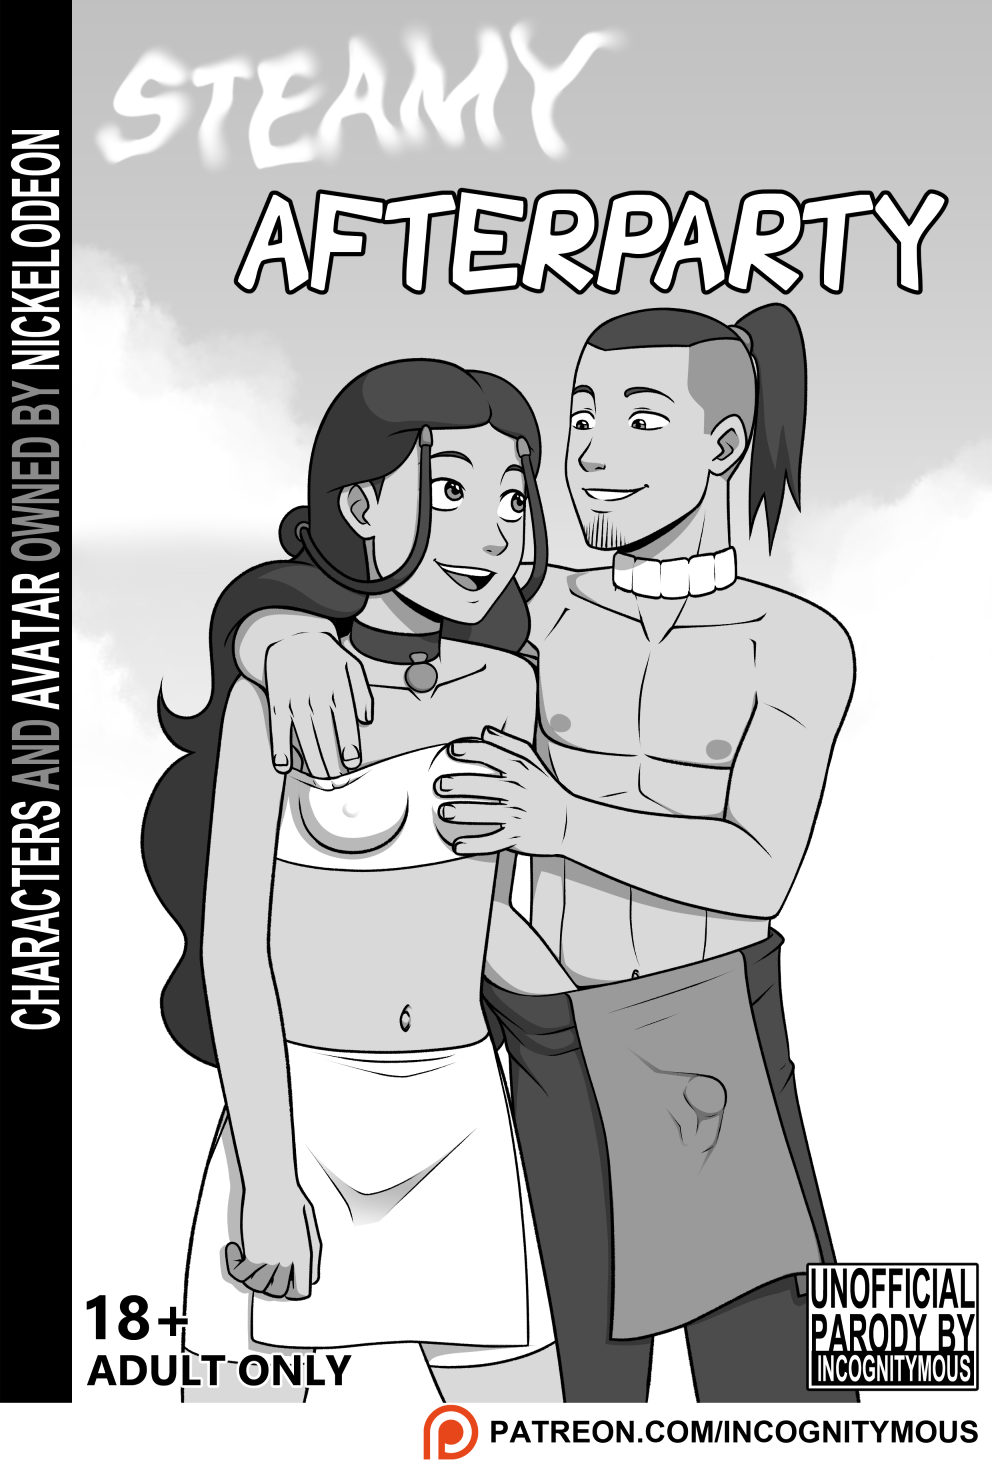 Steamy-Afterparty-Page00-Cover_Gotofap.tk__171294366.png